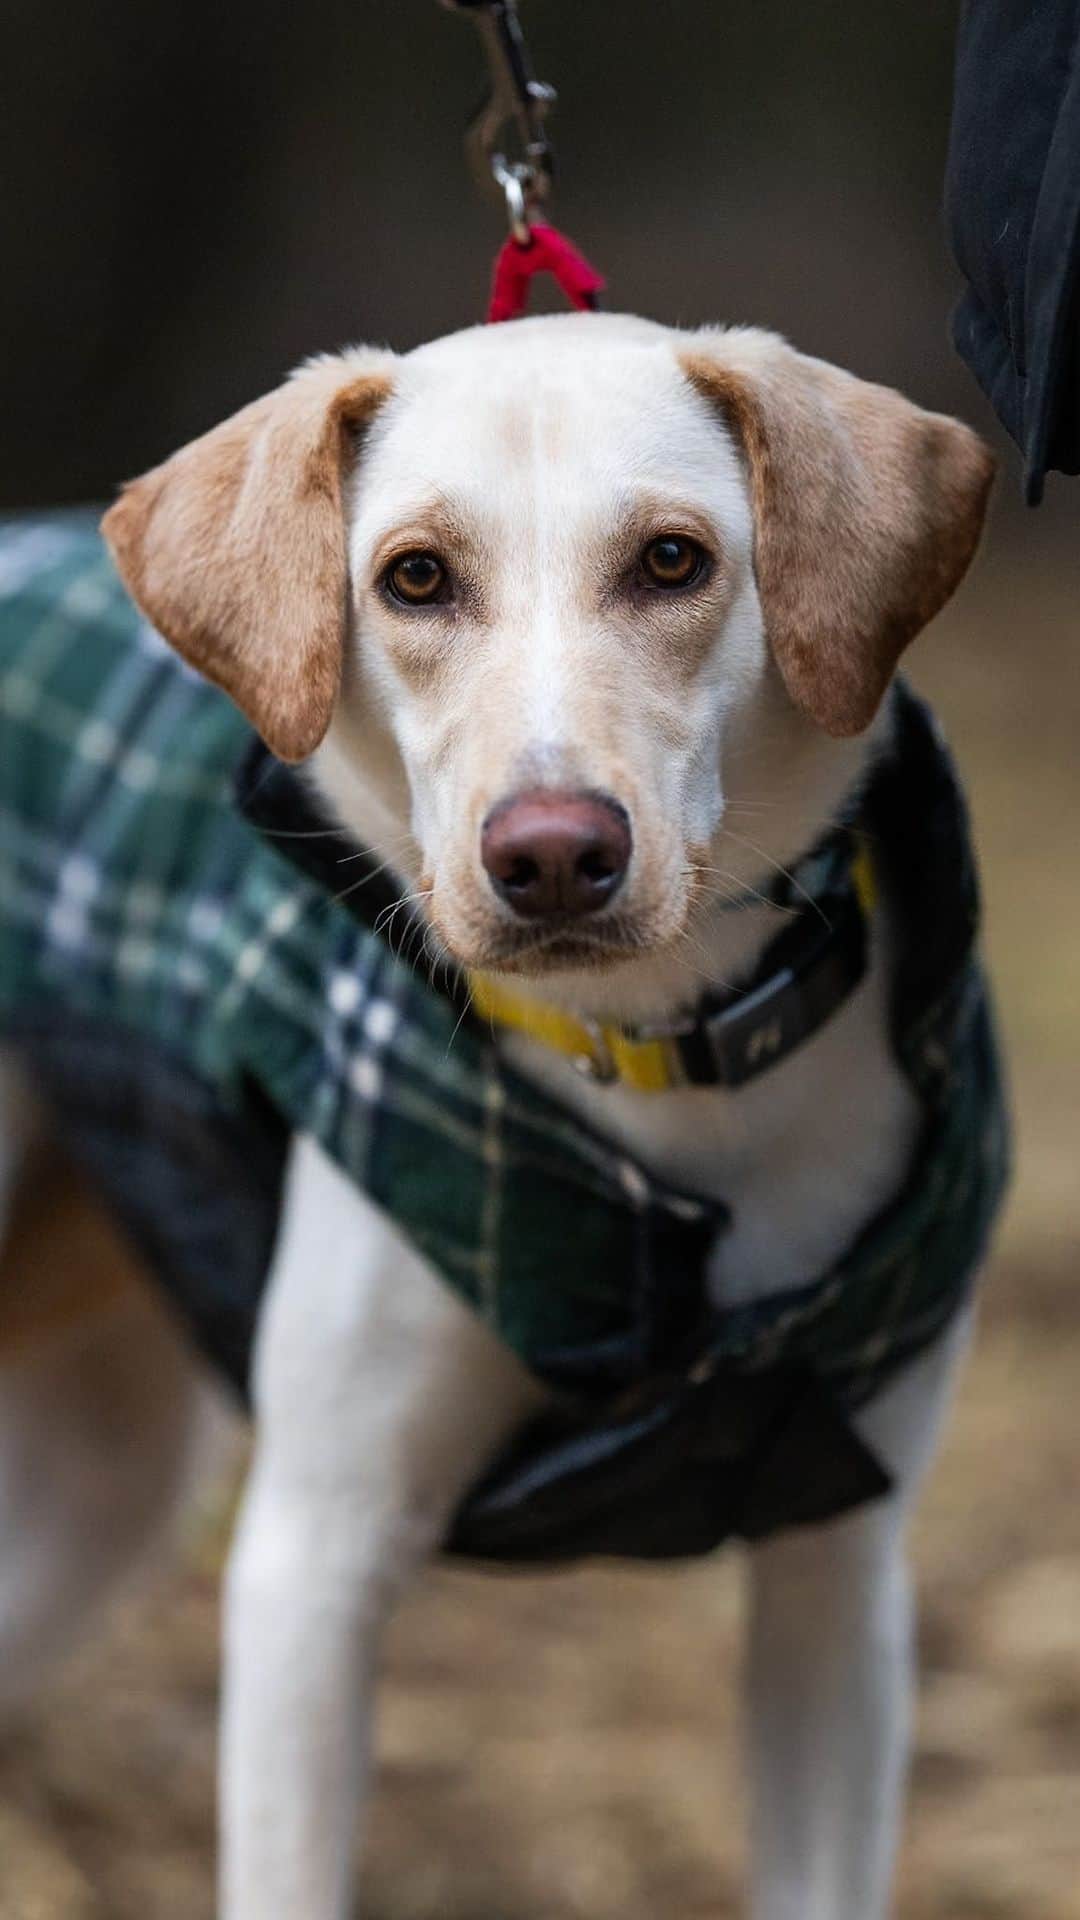 The Dogistのインスタグラム：「ADOPTABLE: Bingo, Hound mix (10 m/o), Fort Greene Park, Brooklyn, NY • “She’s from Selma, Alabama – she came up with her 11 brothers and sisters. She’s new to the city so she’s getting used to the sights and sounds, but inside she’s the most loving, happy, sweet dog. She’s the cuddliest animal I’ve ever had, almost an aggressive cuddler. She really loves to be with others, and loves kids and dogs. She’s getting more confident by the day. She gives hugs like a human – she gets on her hind legs, crawls up you, and goes for the embrace.”  Bingo is available for adoption now via @badassanimalrescue!」